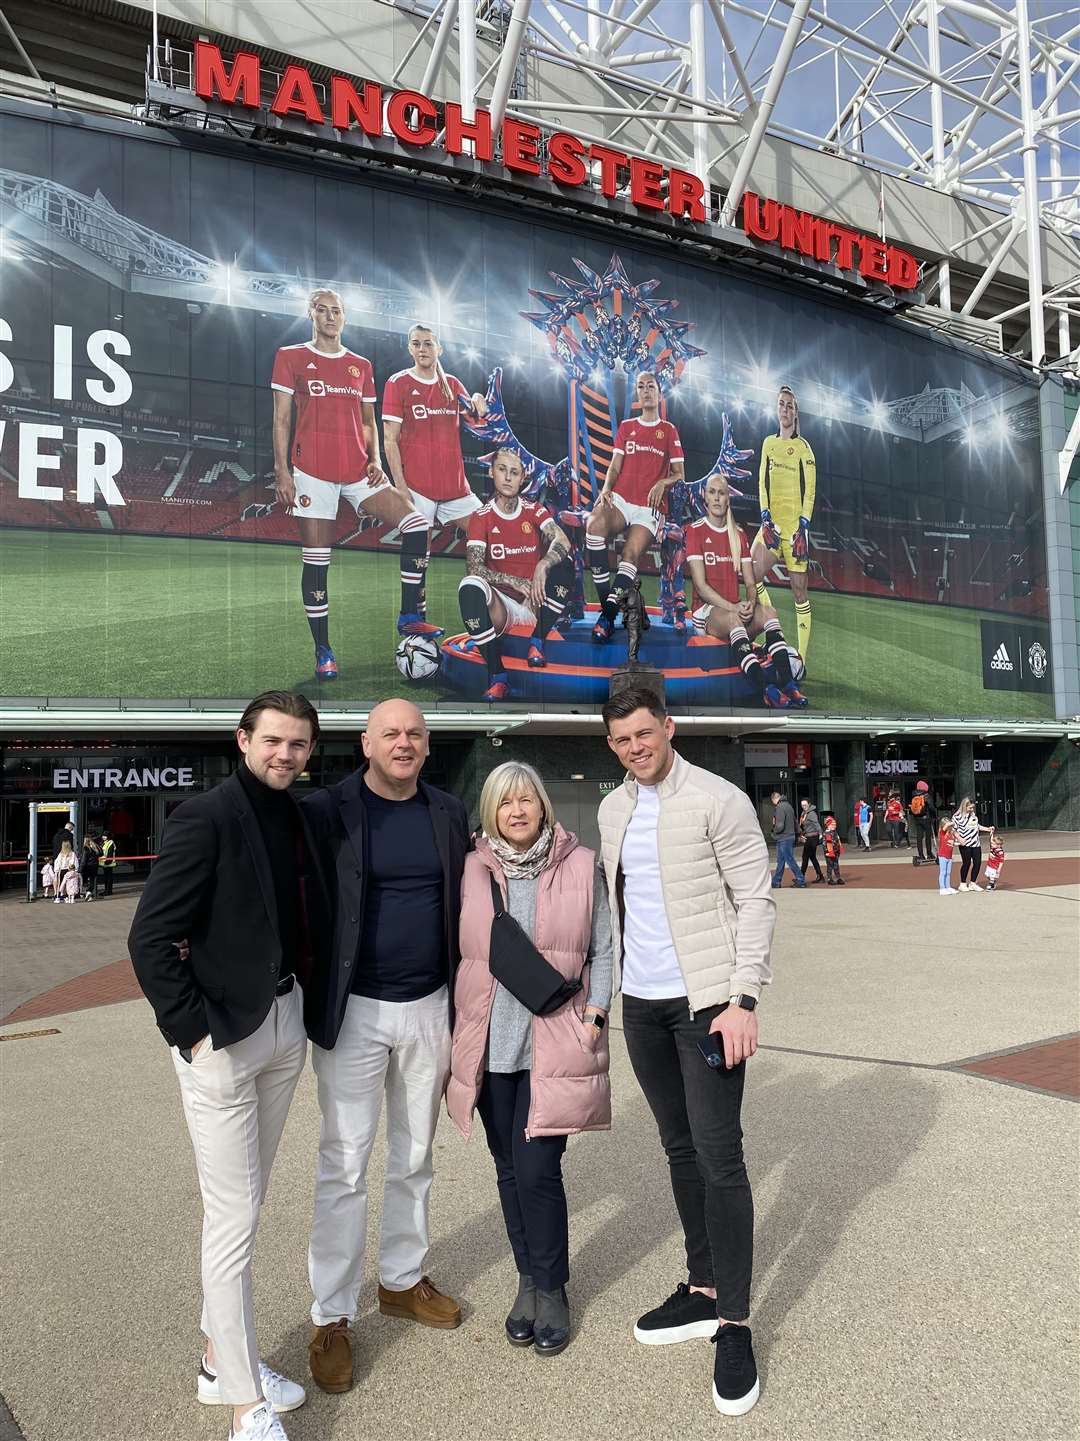 Brothers Luca and Giorgio flank dad Mario and mum Carol in front of a giant poster of Alessia Russo and her Manchester United team-mates outside Old Trafford